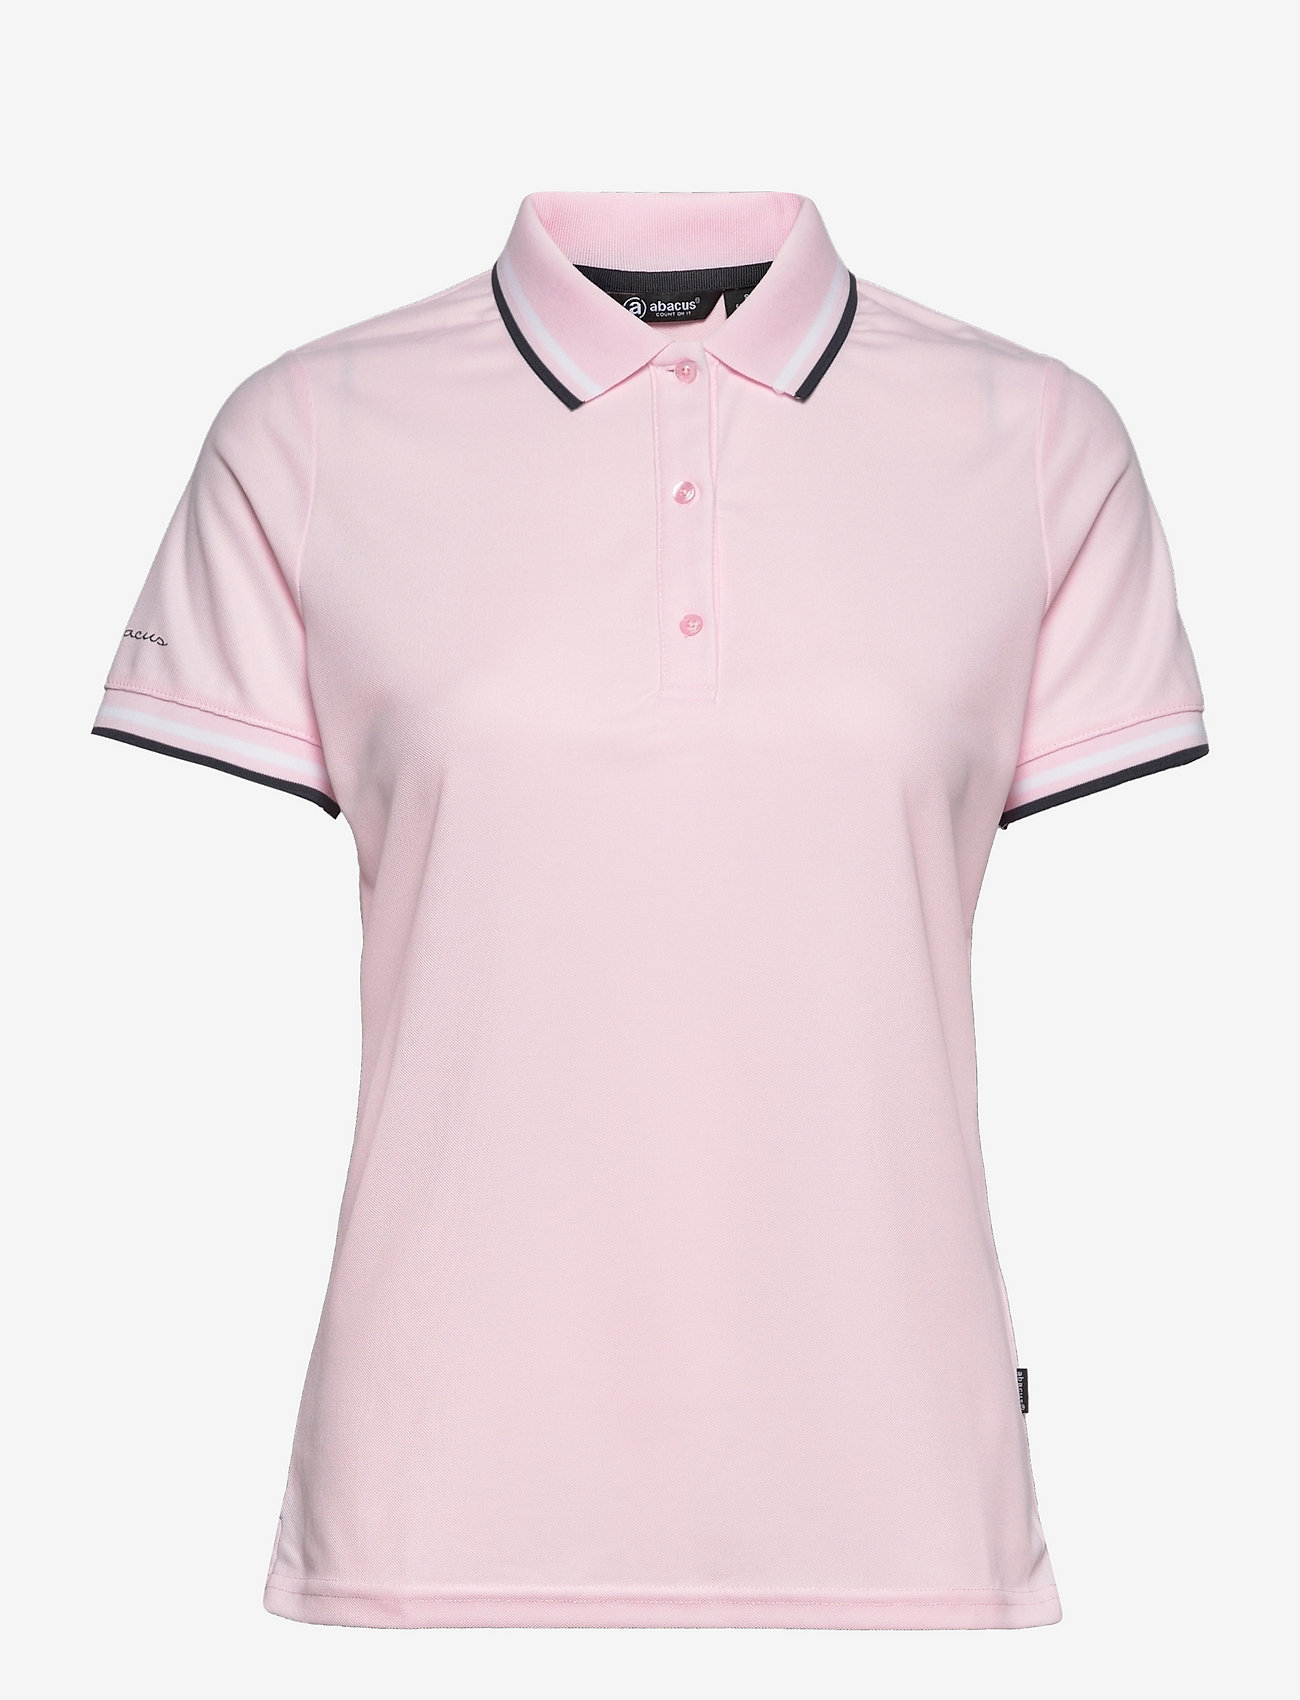 Abacus - Lds Pines polo - laveste priser - lt.pink - 0